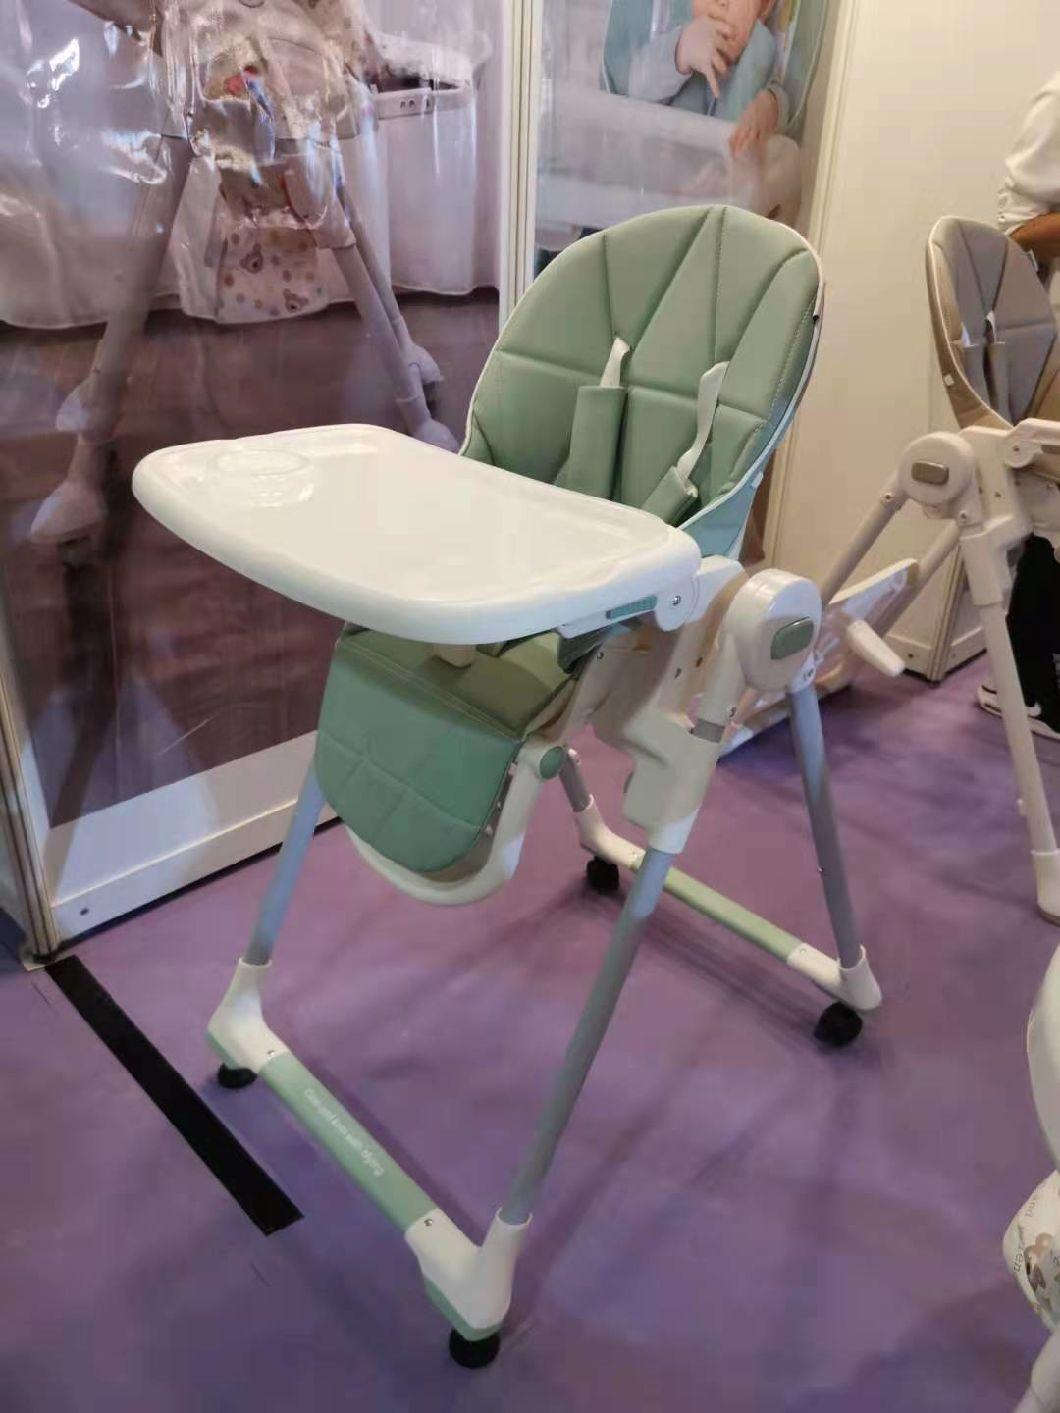 Modern Wood Baby Cot Bed Foldable for Sale Near Me